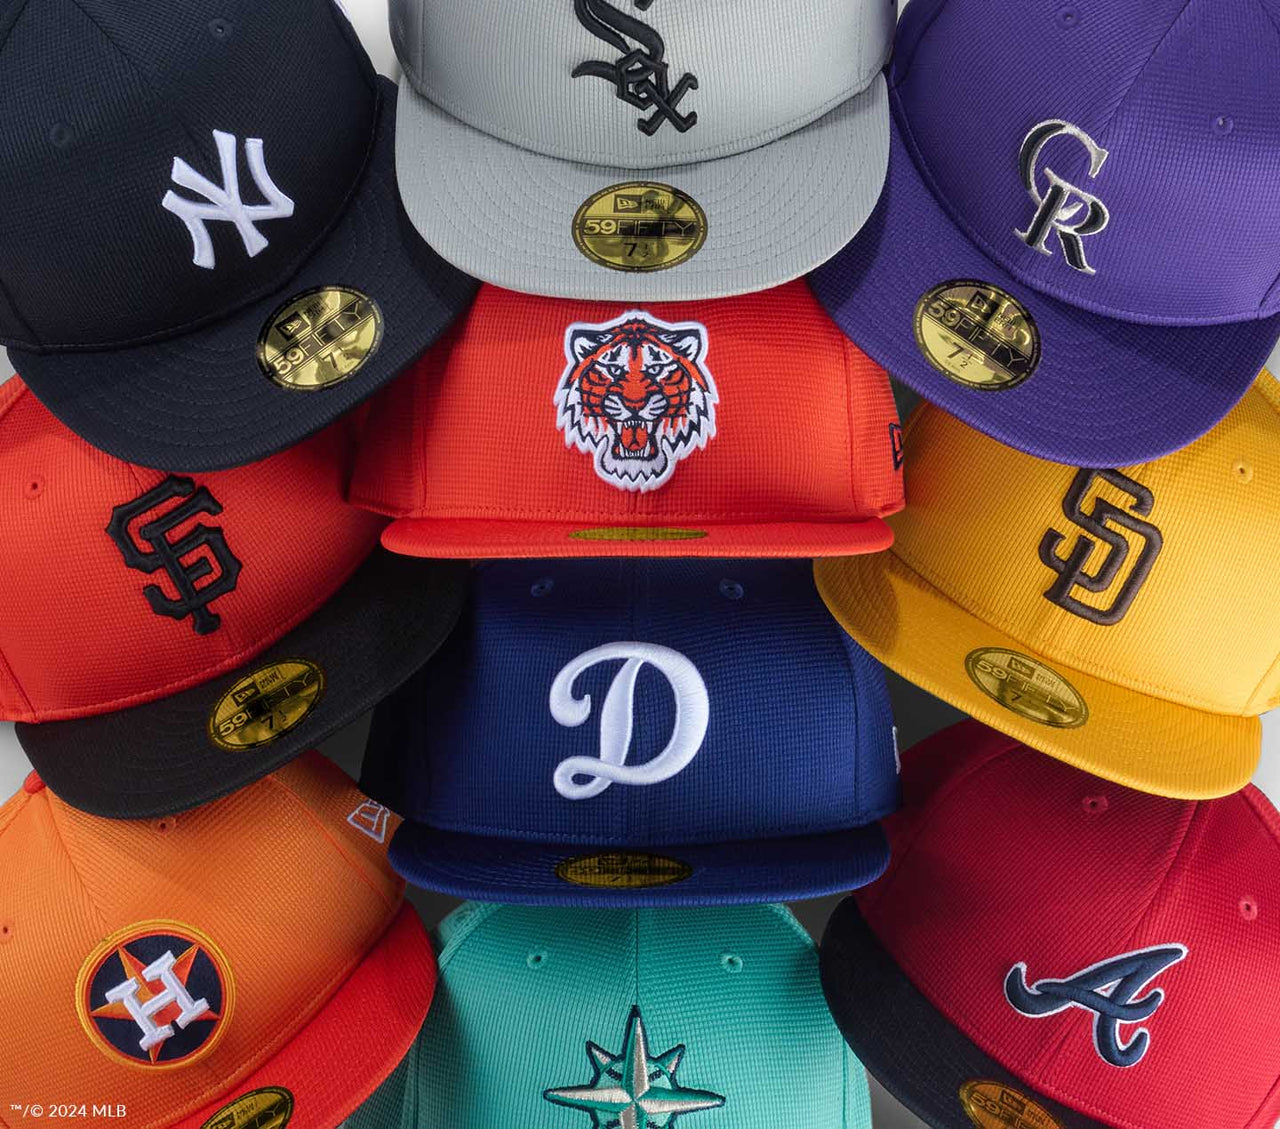 Shop the MLB Spring Training collection